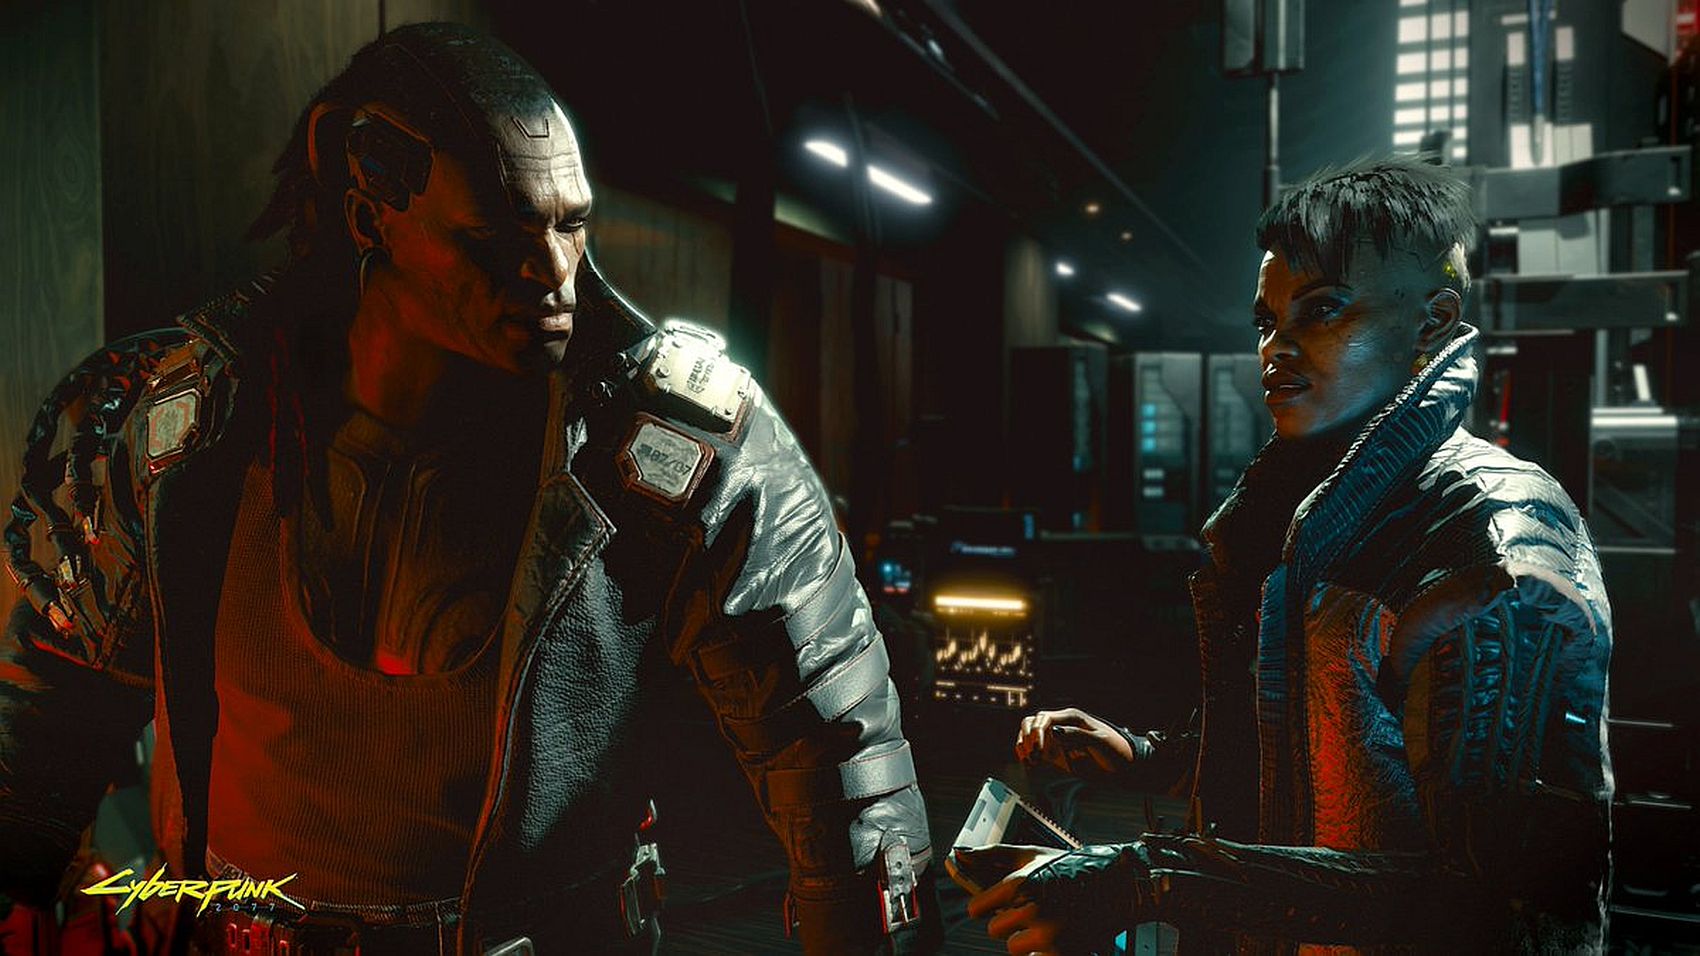 Image for Cyberpunk 2077 extended gameplay demo to be shown at PAX West